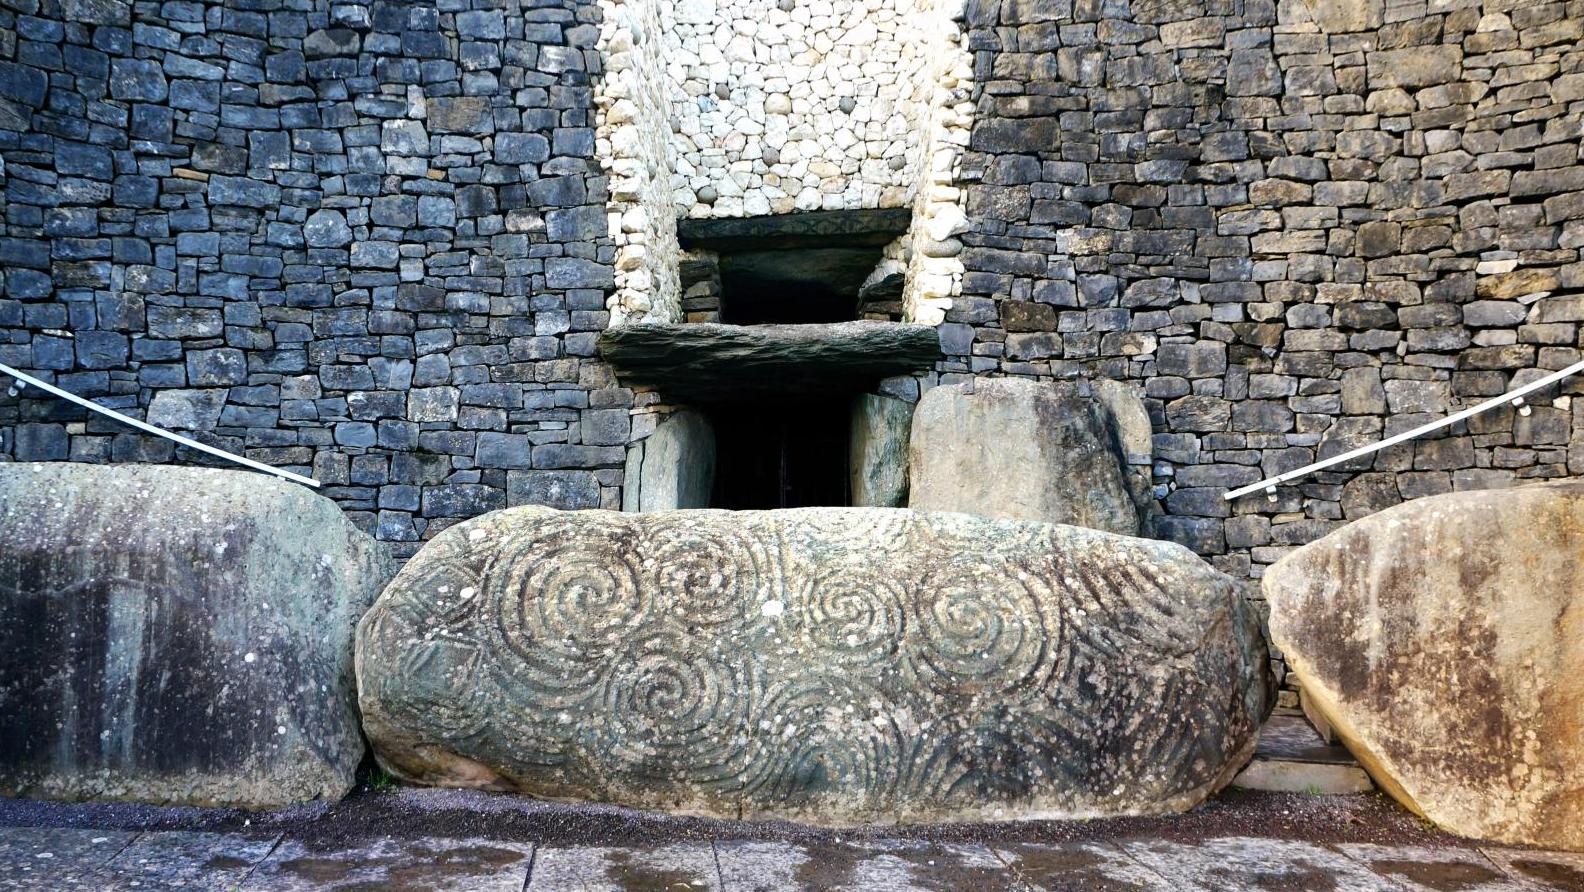 Entrance to the Newgrange passage tomb, with the winter solstice sun window and the... The Megaliths of Newgrange, an Outstanding Site in Ireland